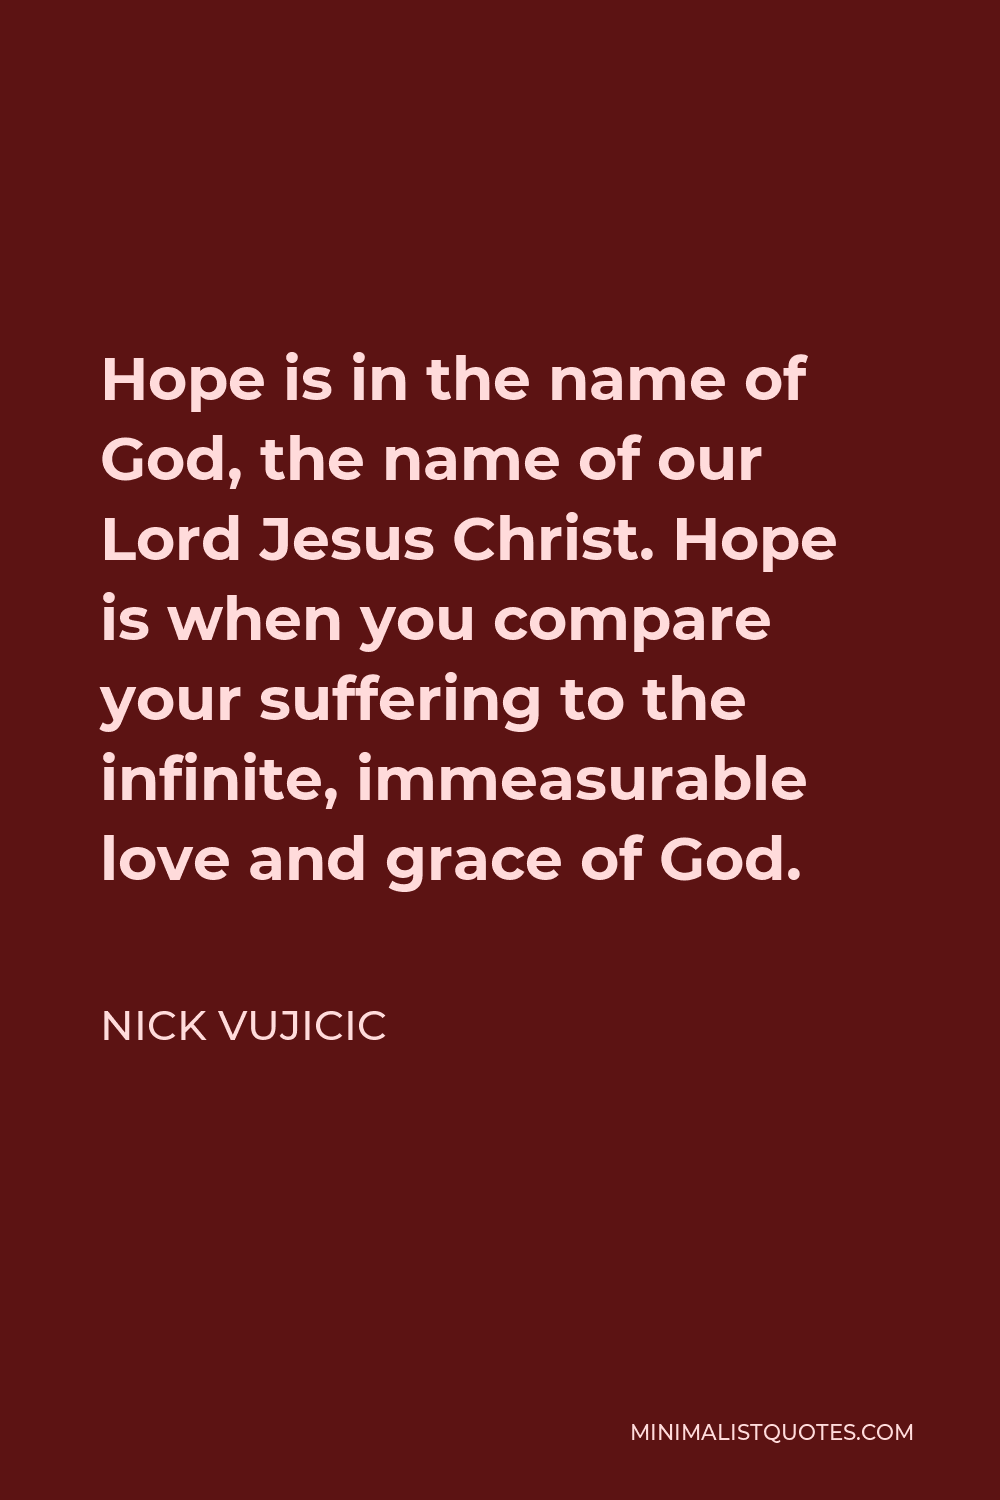 Nick Vujicic Quote - Hope is in the name of God, the name of our Lord Jesus Christ. Hope is when you compare your suffering to the infinite, immeasurable love and grace of God.